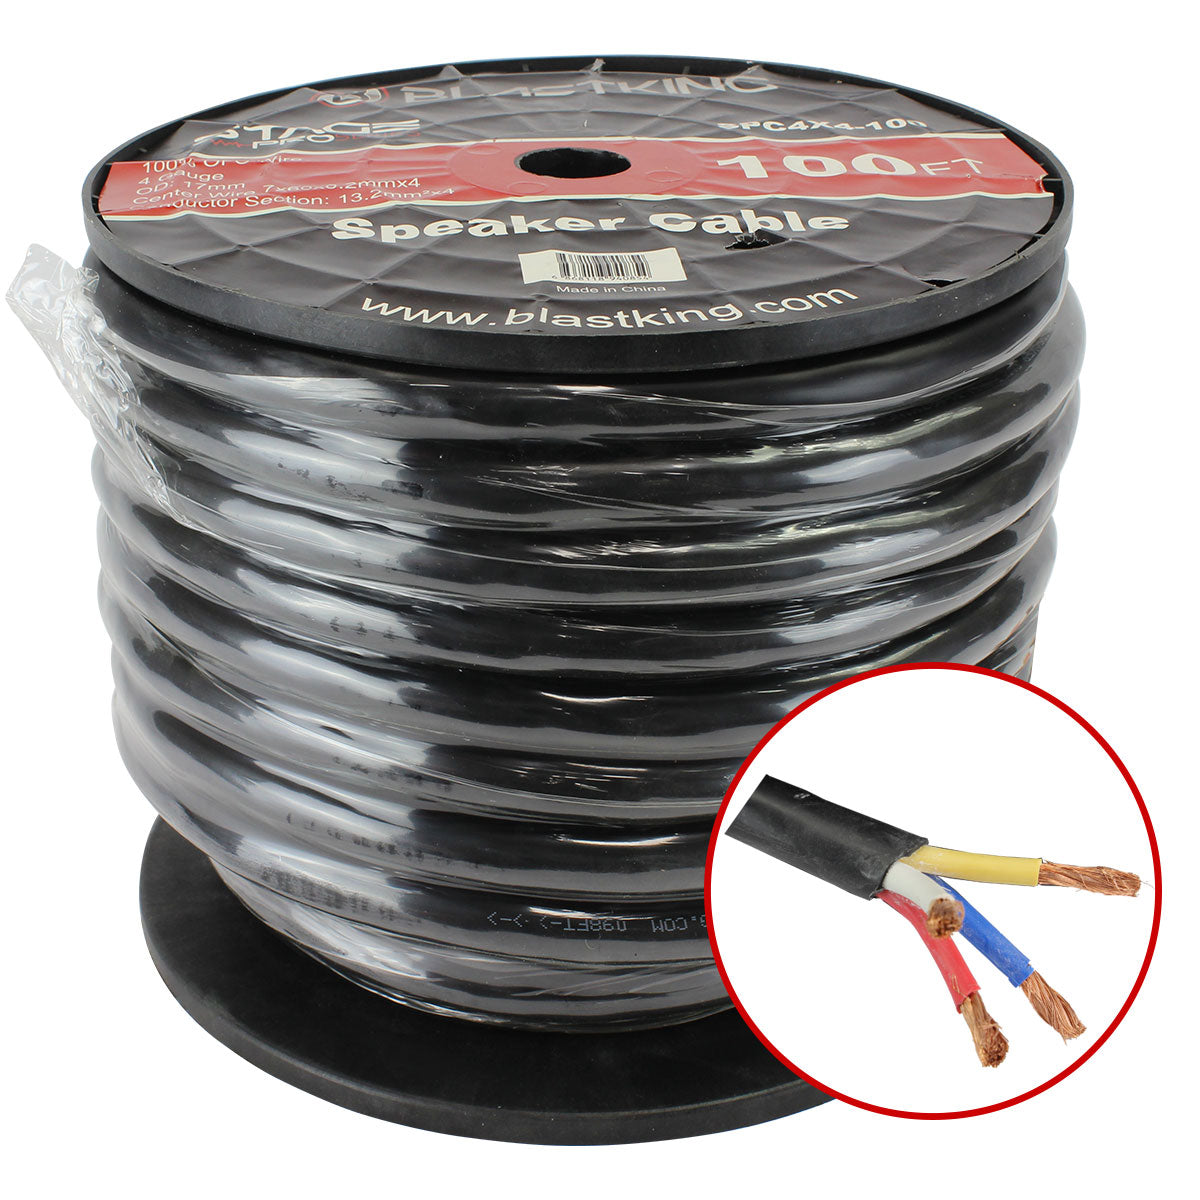 Blastking SPC4X4-100 4 AWG 4-Conductor Speaker Cable 100 Ft